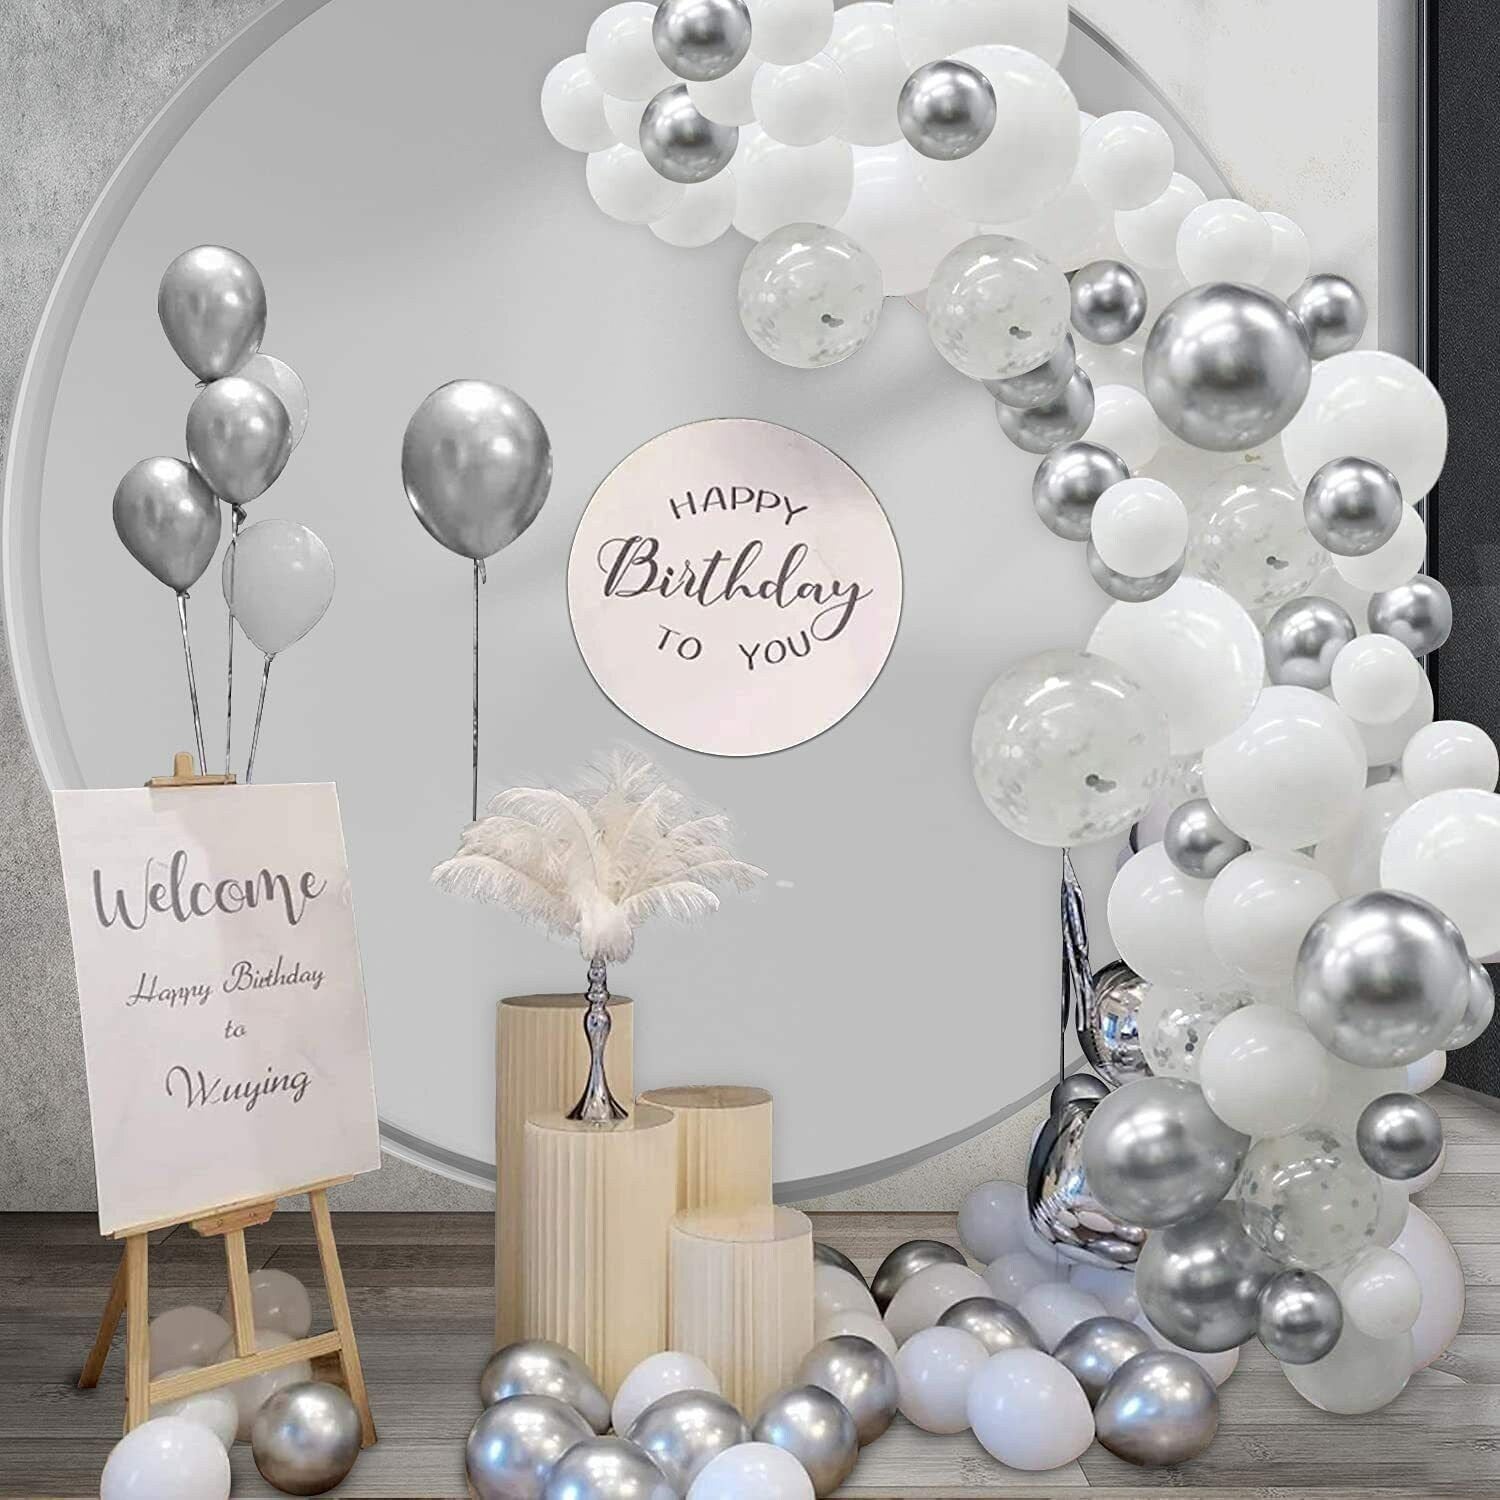 100pcs White Silver Balloon Garland Arch Kit | White Silver Metallic Confetti Balloons for Baby Shower Wedding Birthday Party Decorations